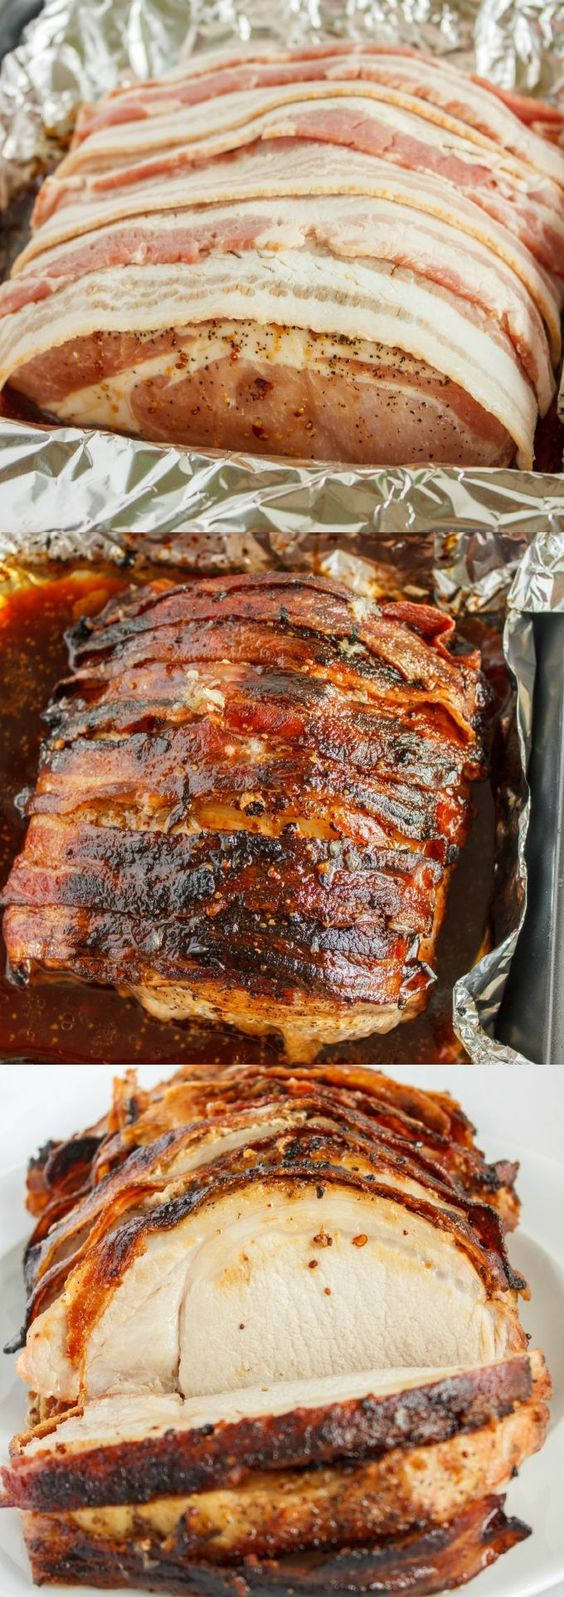 Dinner Ideas With Bacon
 Thanksgiving Bacon and Christmas dinner recipes on Pinterest